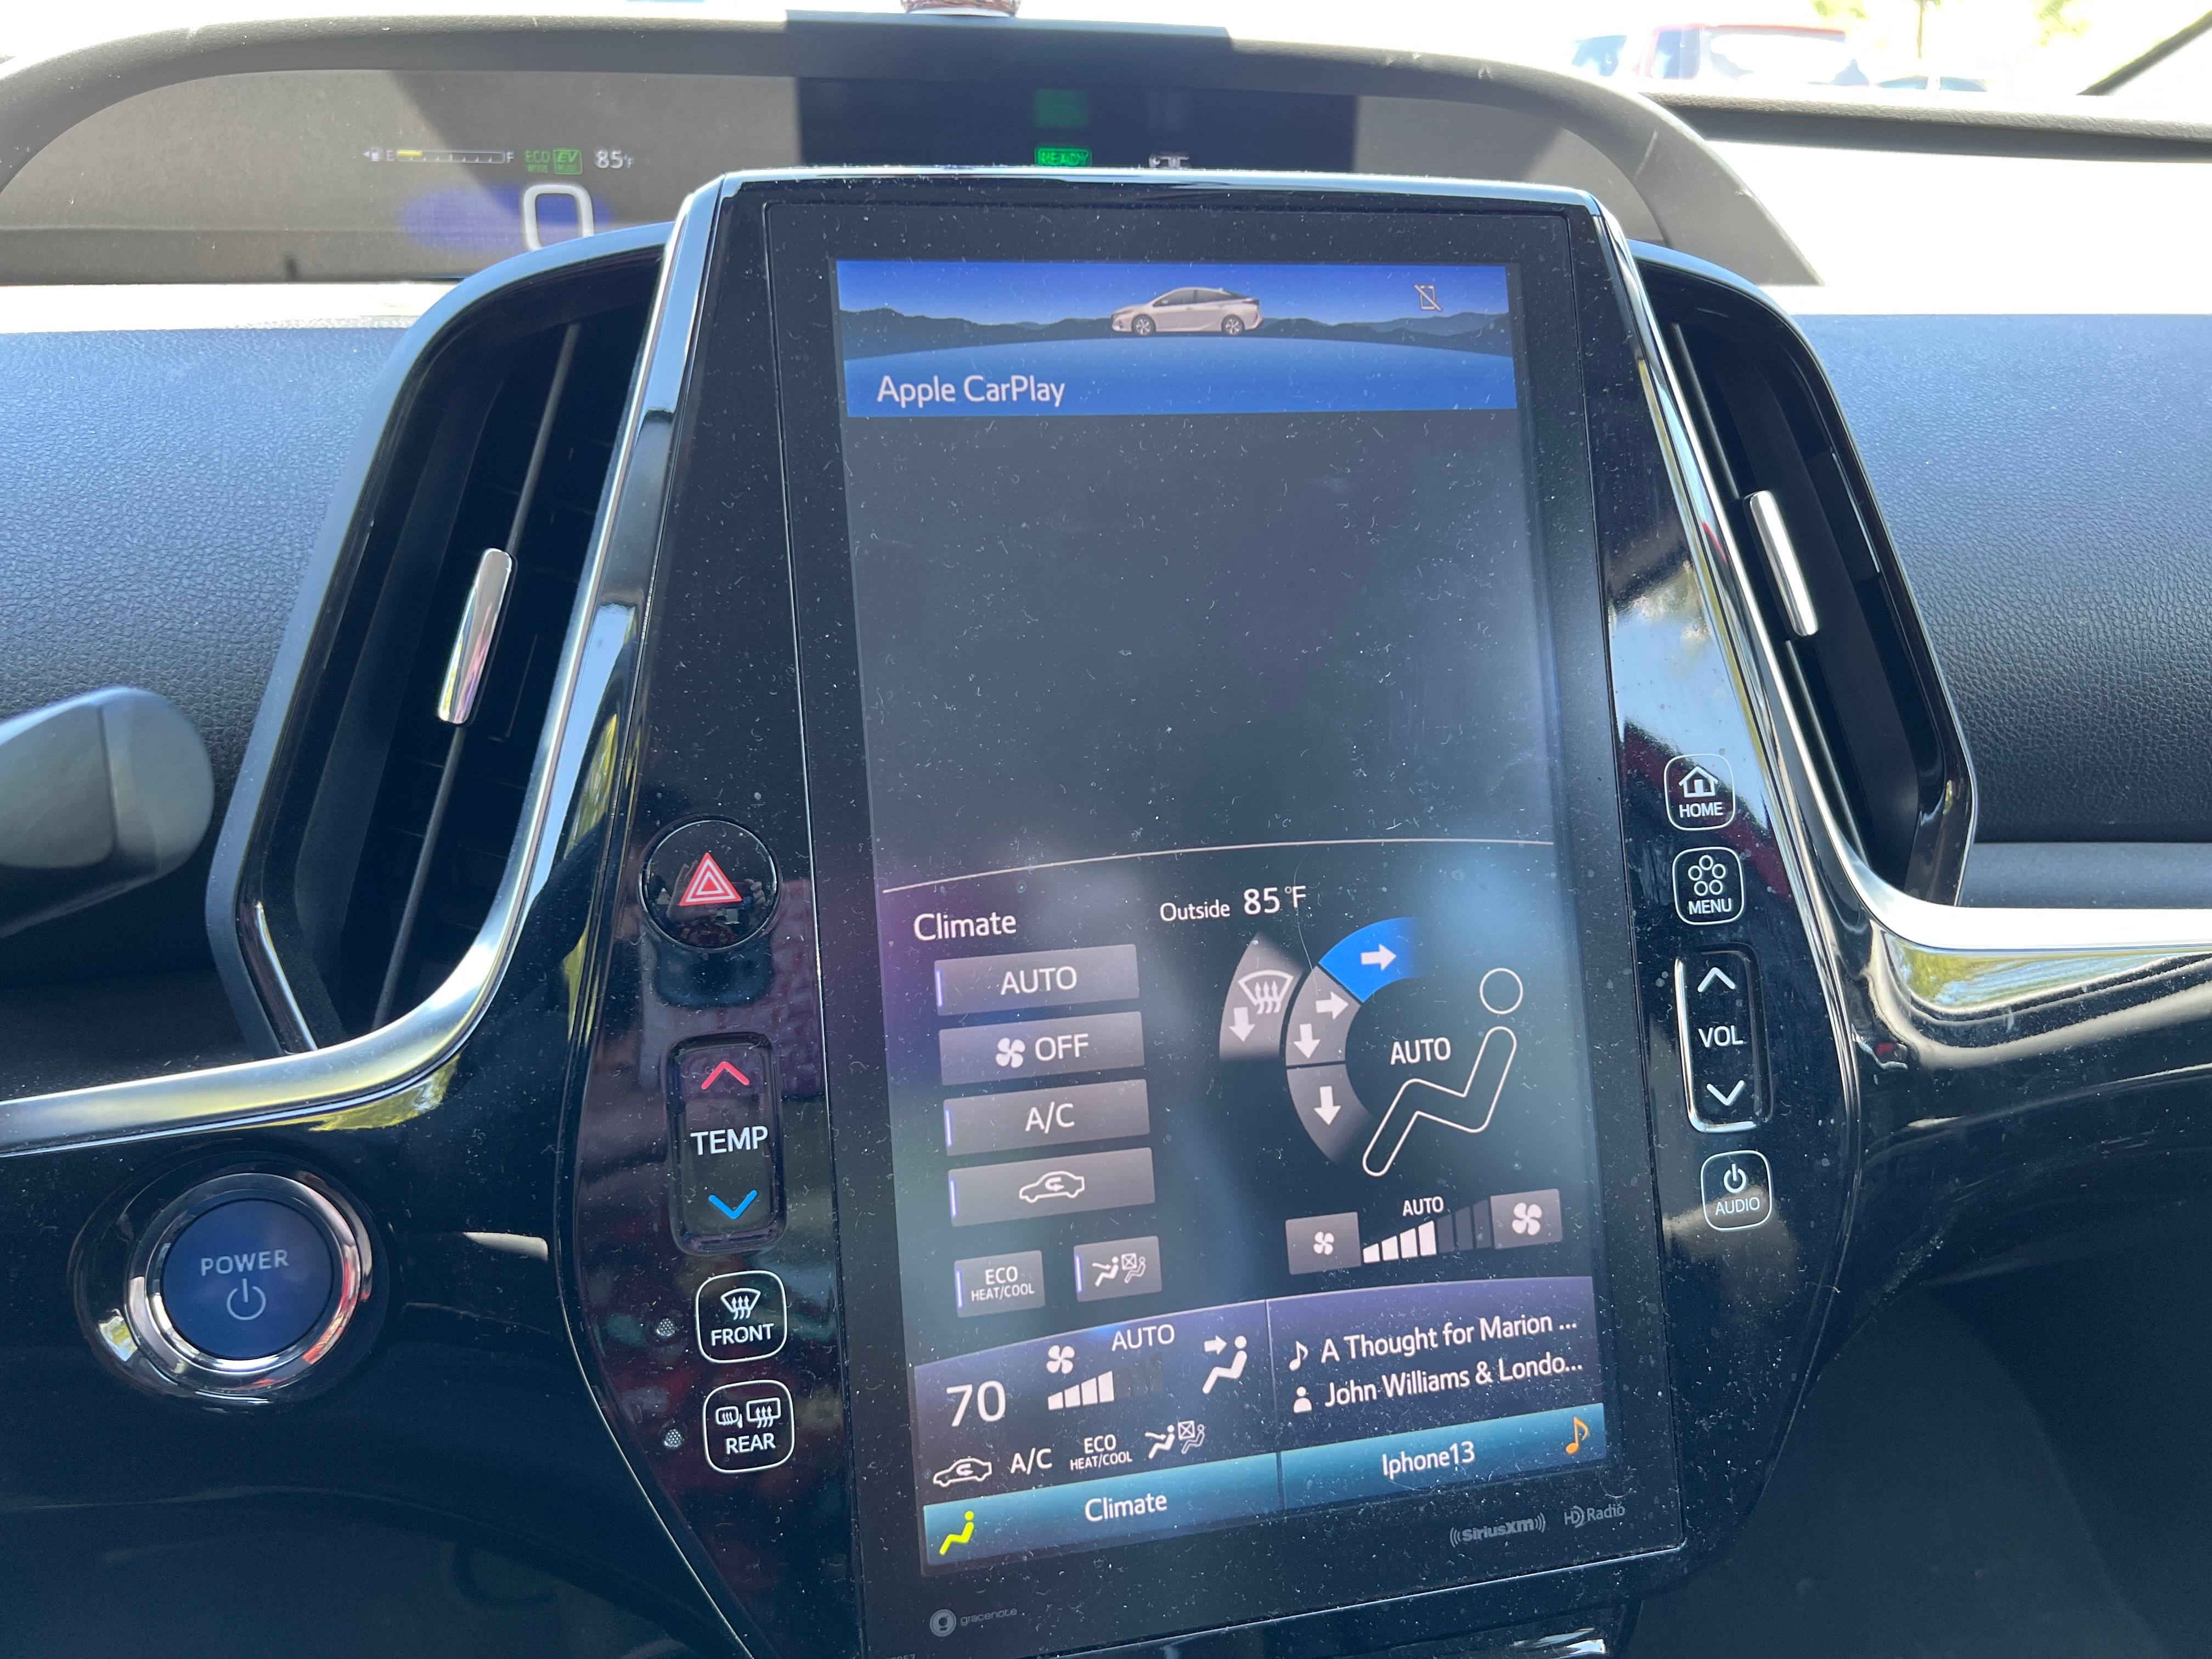 How do I fix my CarPlay after it stoped w… - Apple Community